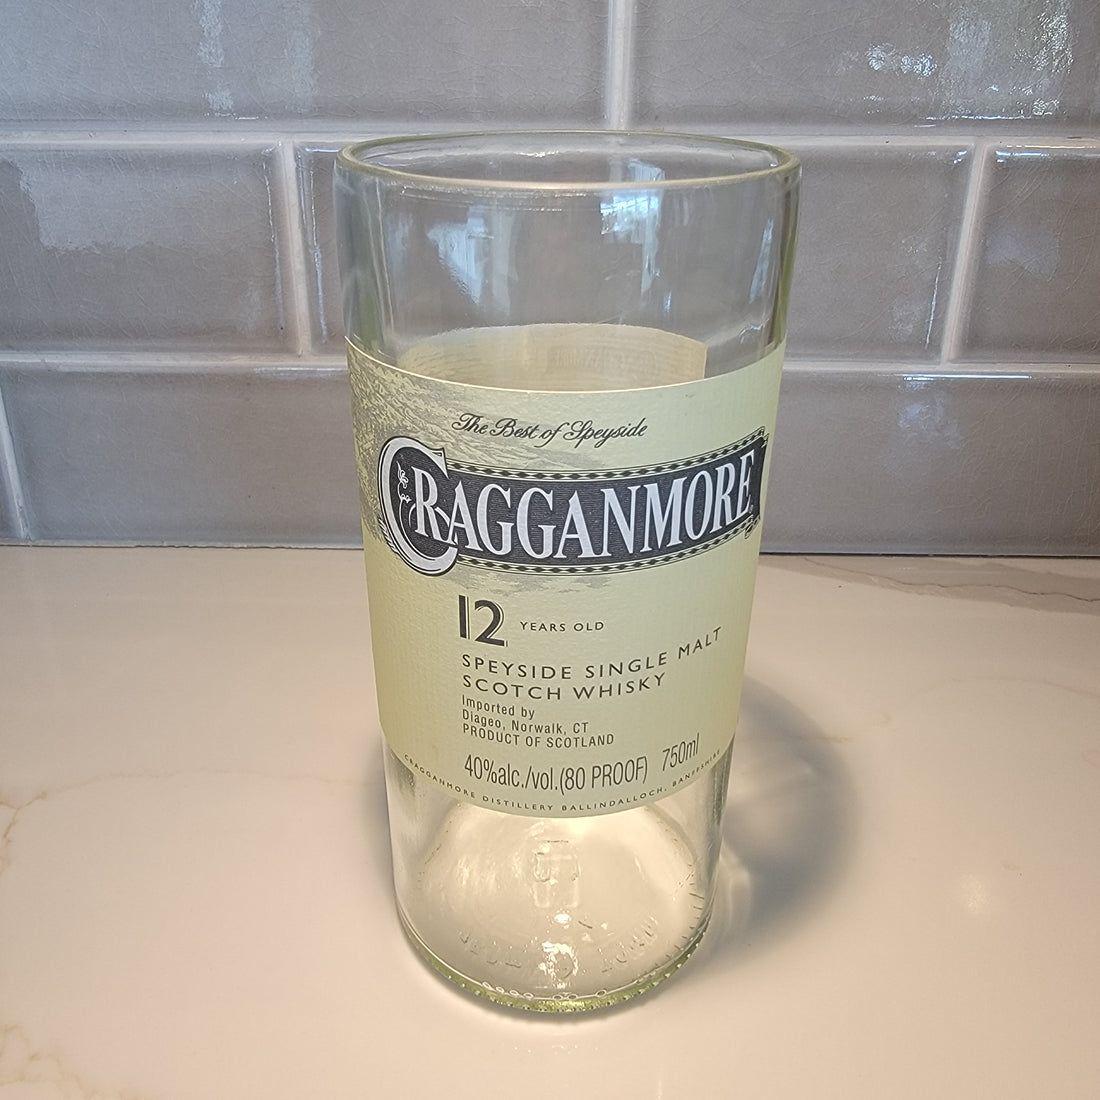 Cragganmore Scotch Whisky 750ml Hand Cut Upcycled Liquor Bottle Candle  - Choose Your Scent